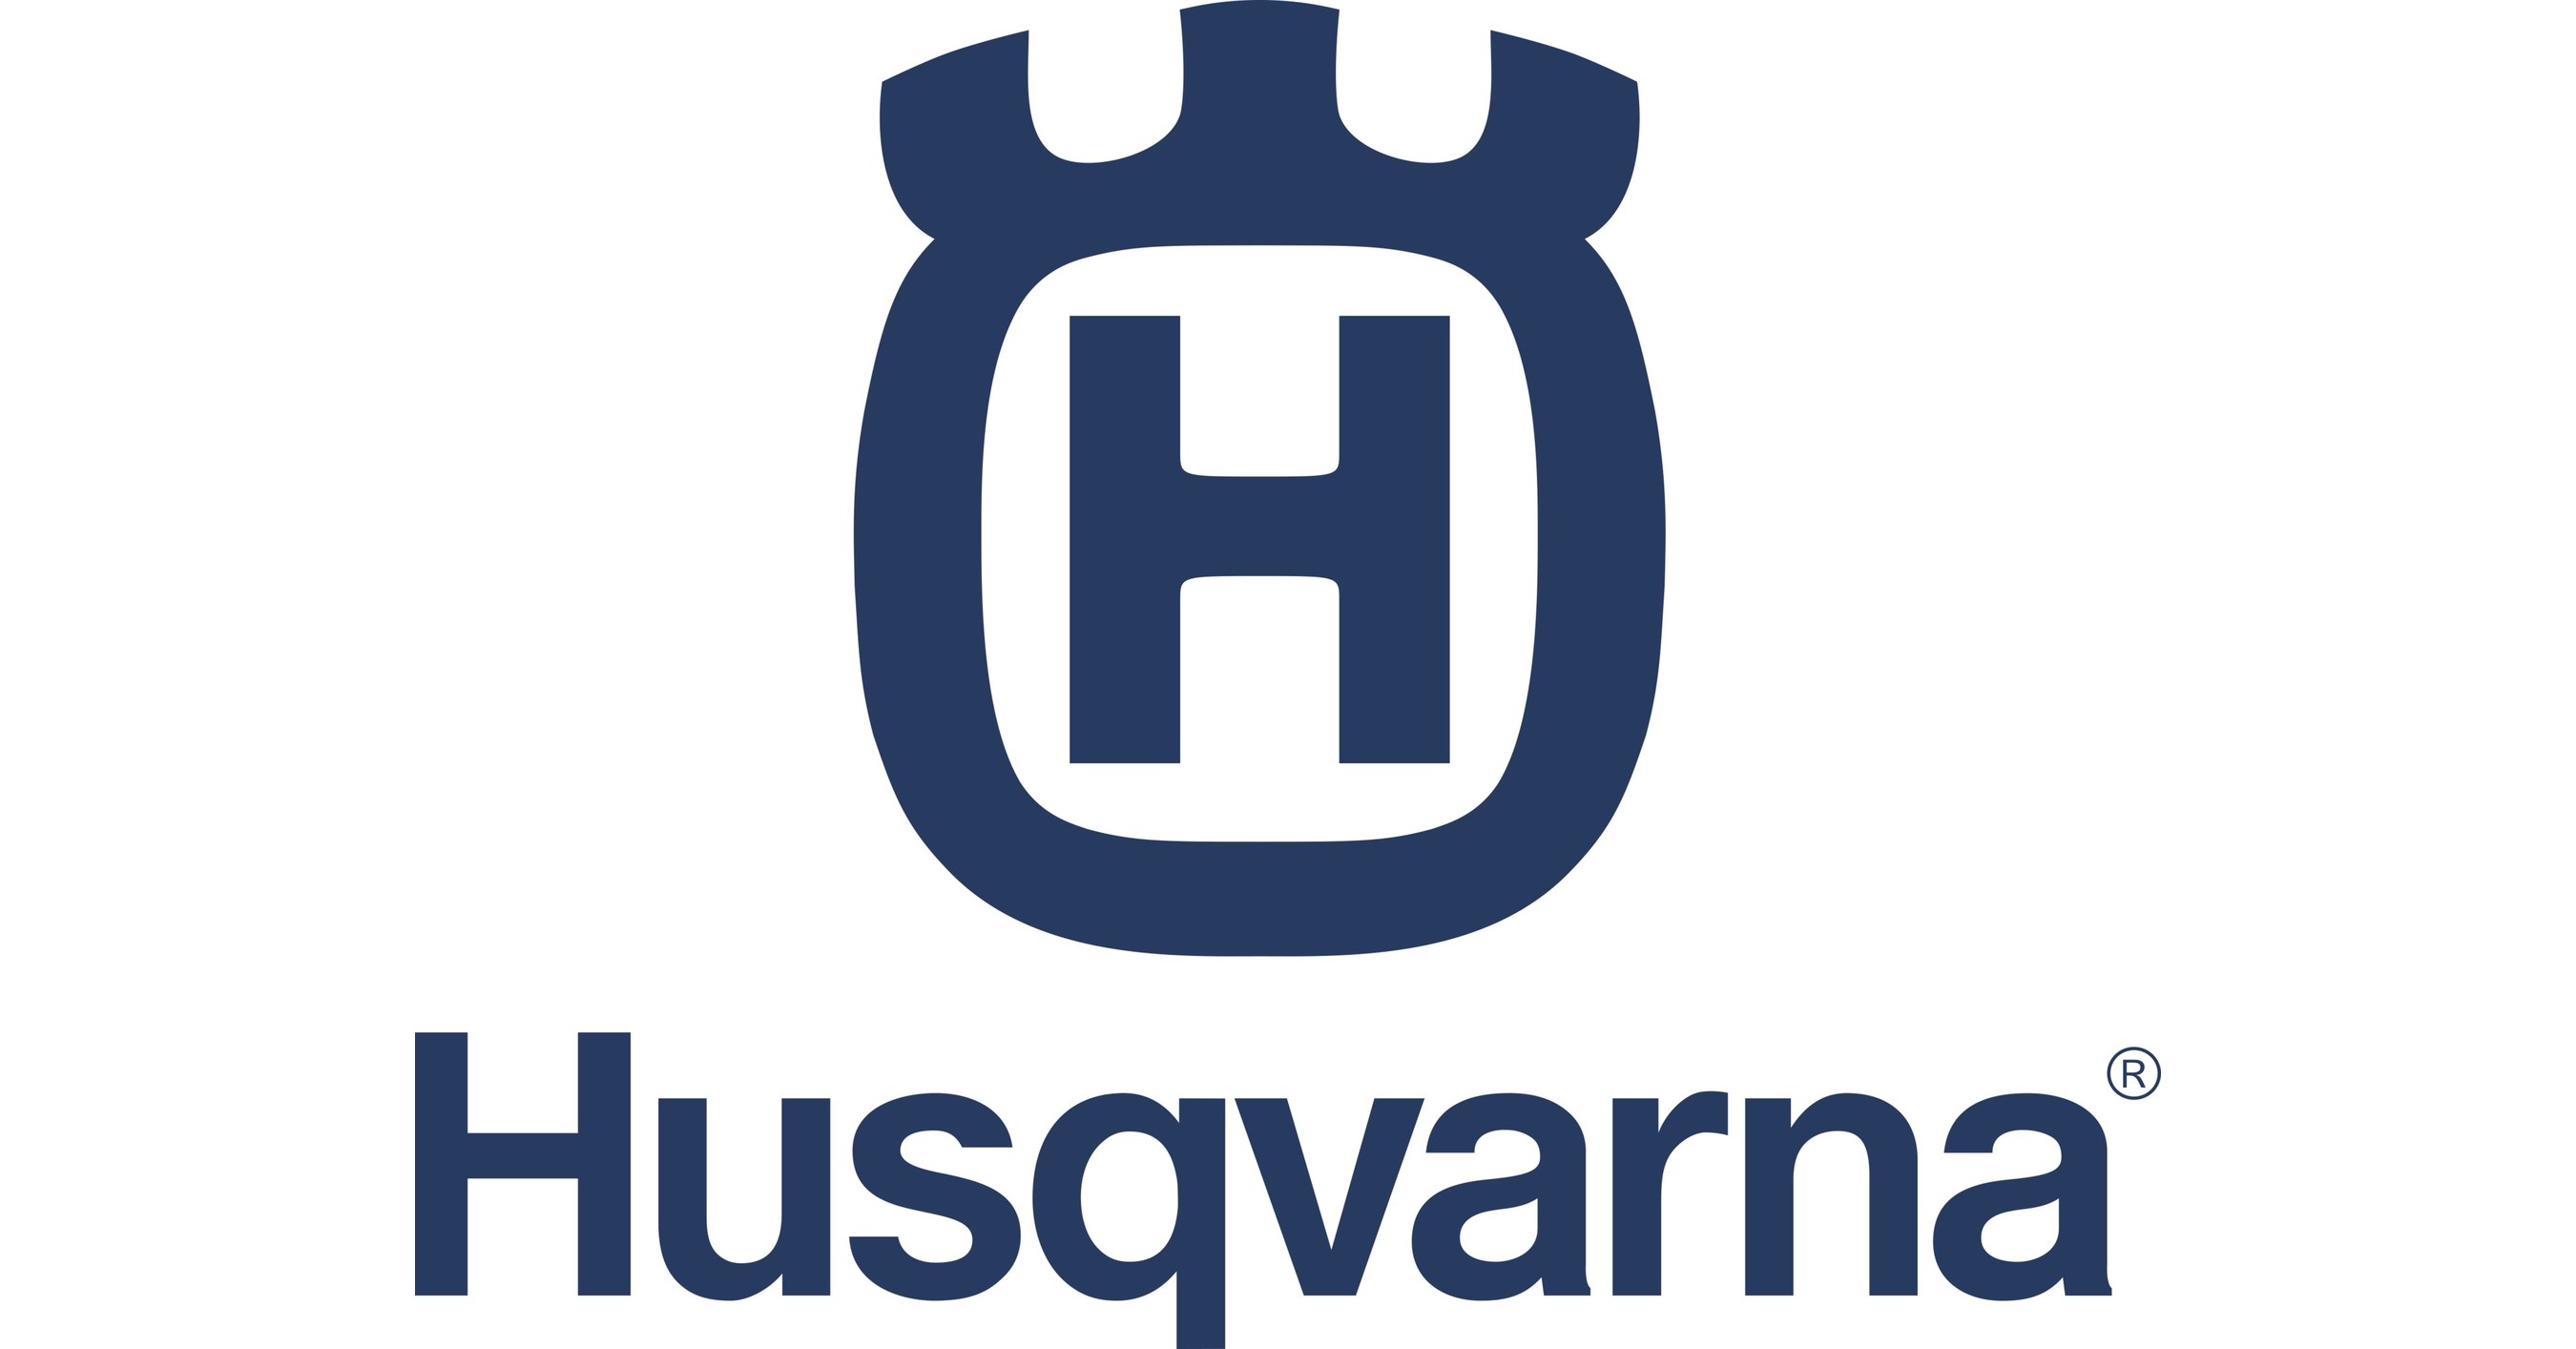 Husqvarna Announces New Leadership Strategy to Drive Growth in North America